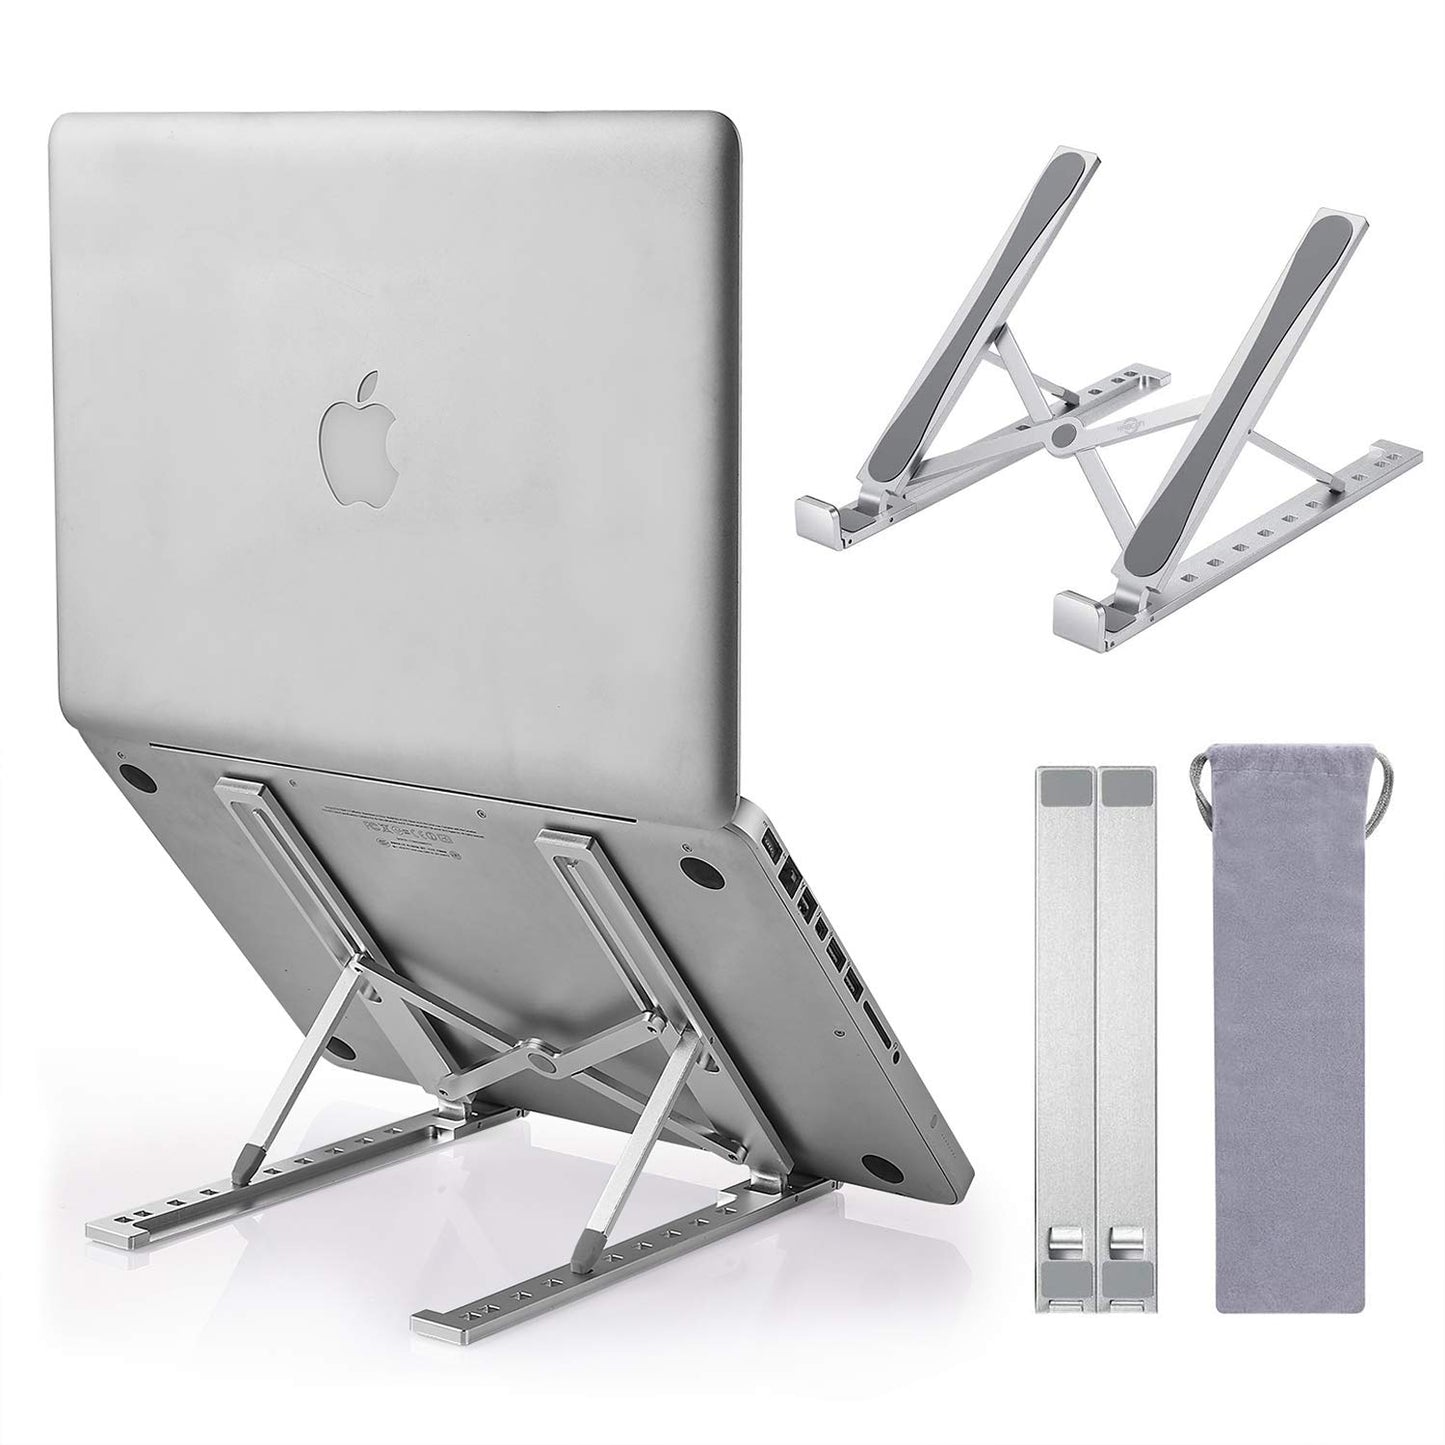 [US Stock] KABCON Quality Laptop Stand